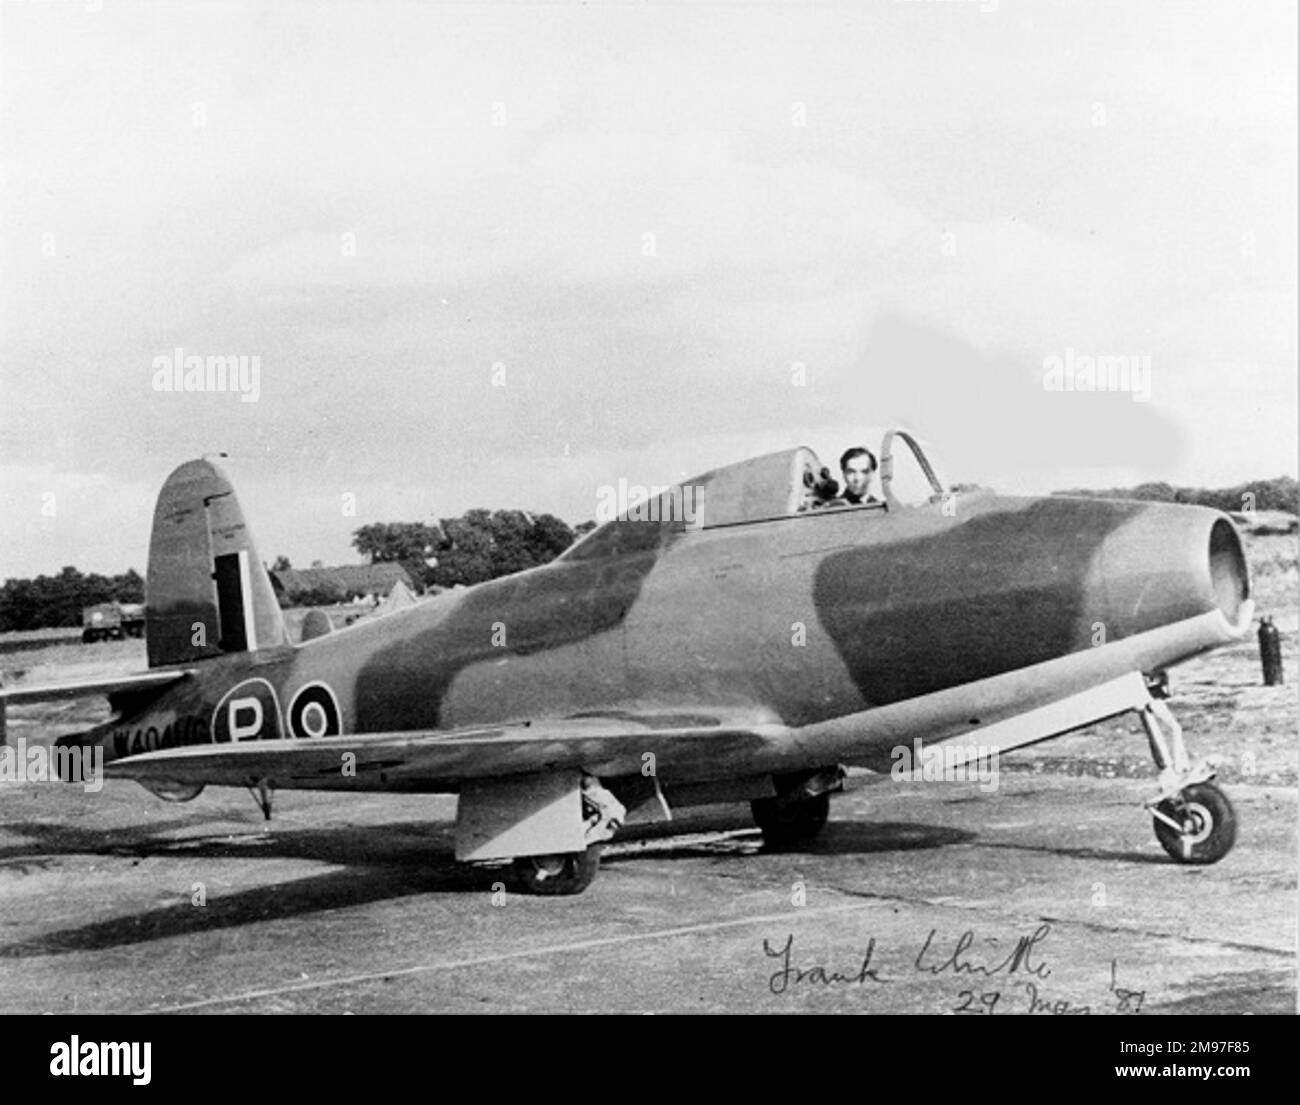 Gloster E 2839 -Britain's first jet aircraft that took to the air for the first time in May 1941. Stock Photo